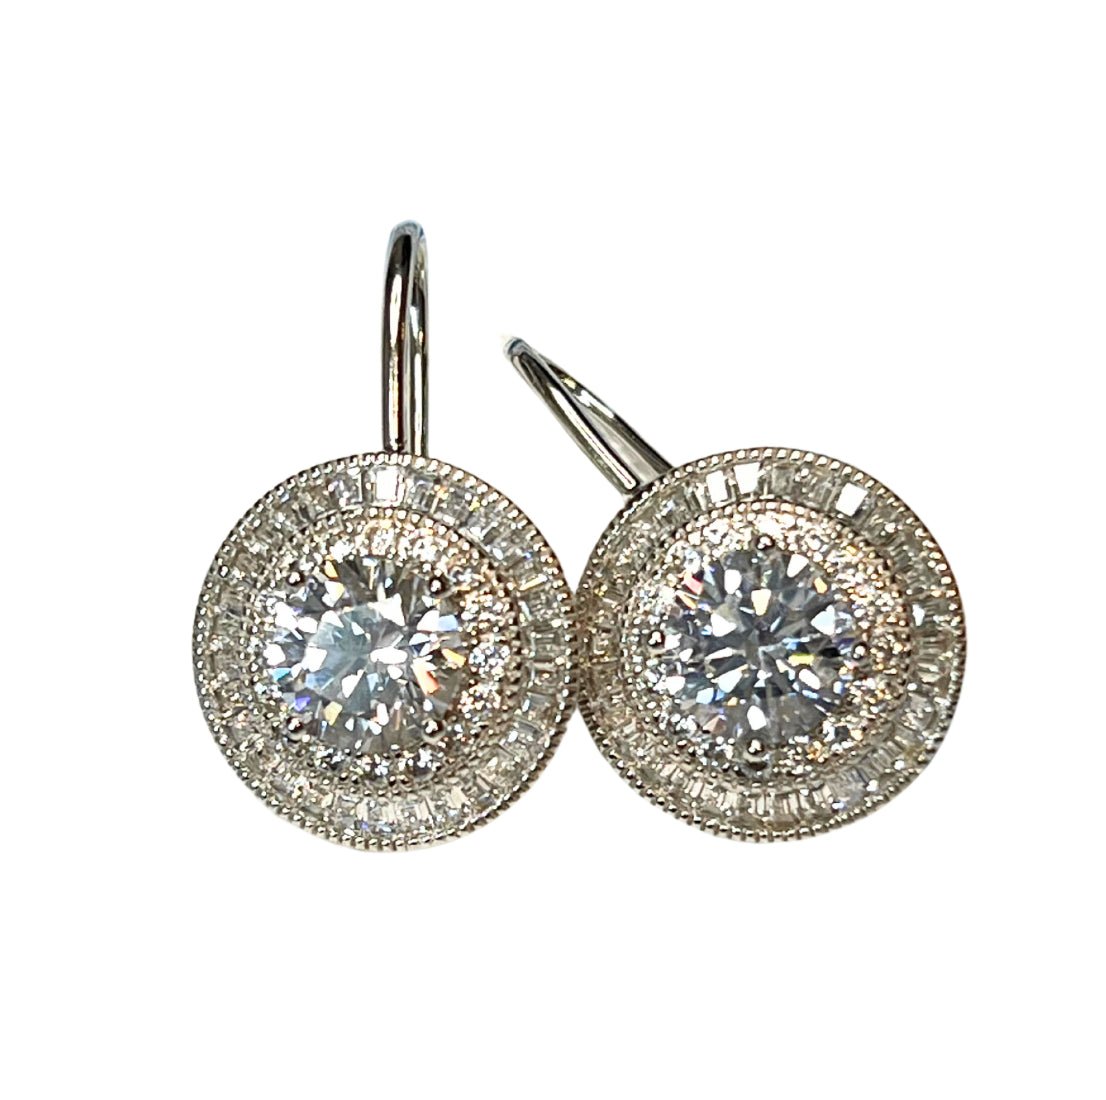 4CT Vintage Style Clear Cubic Zirconia Round Earrings - Abigail Fox Designs